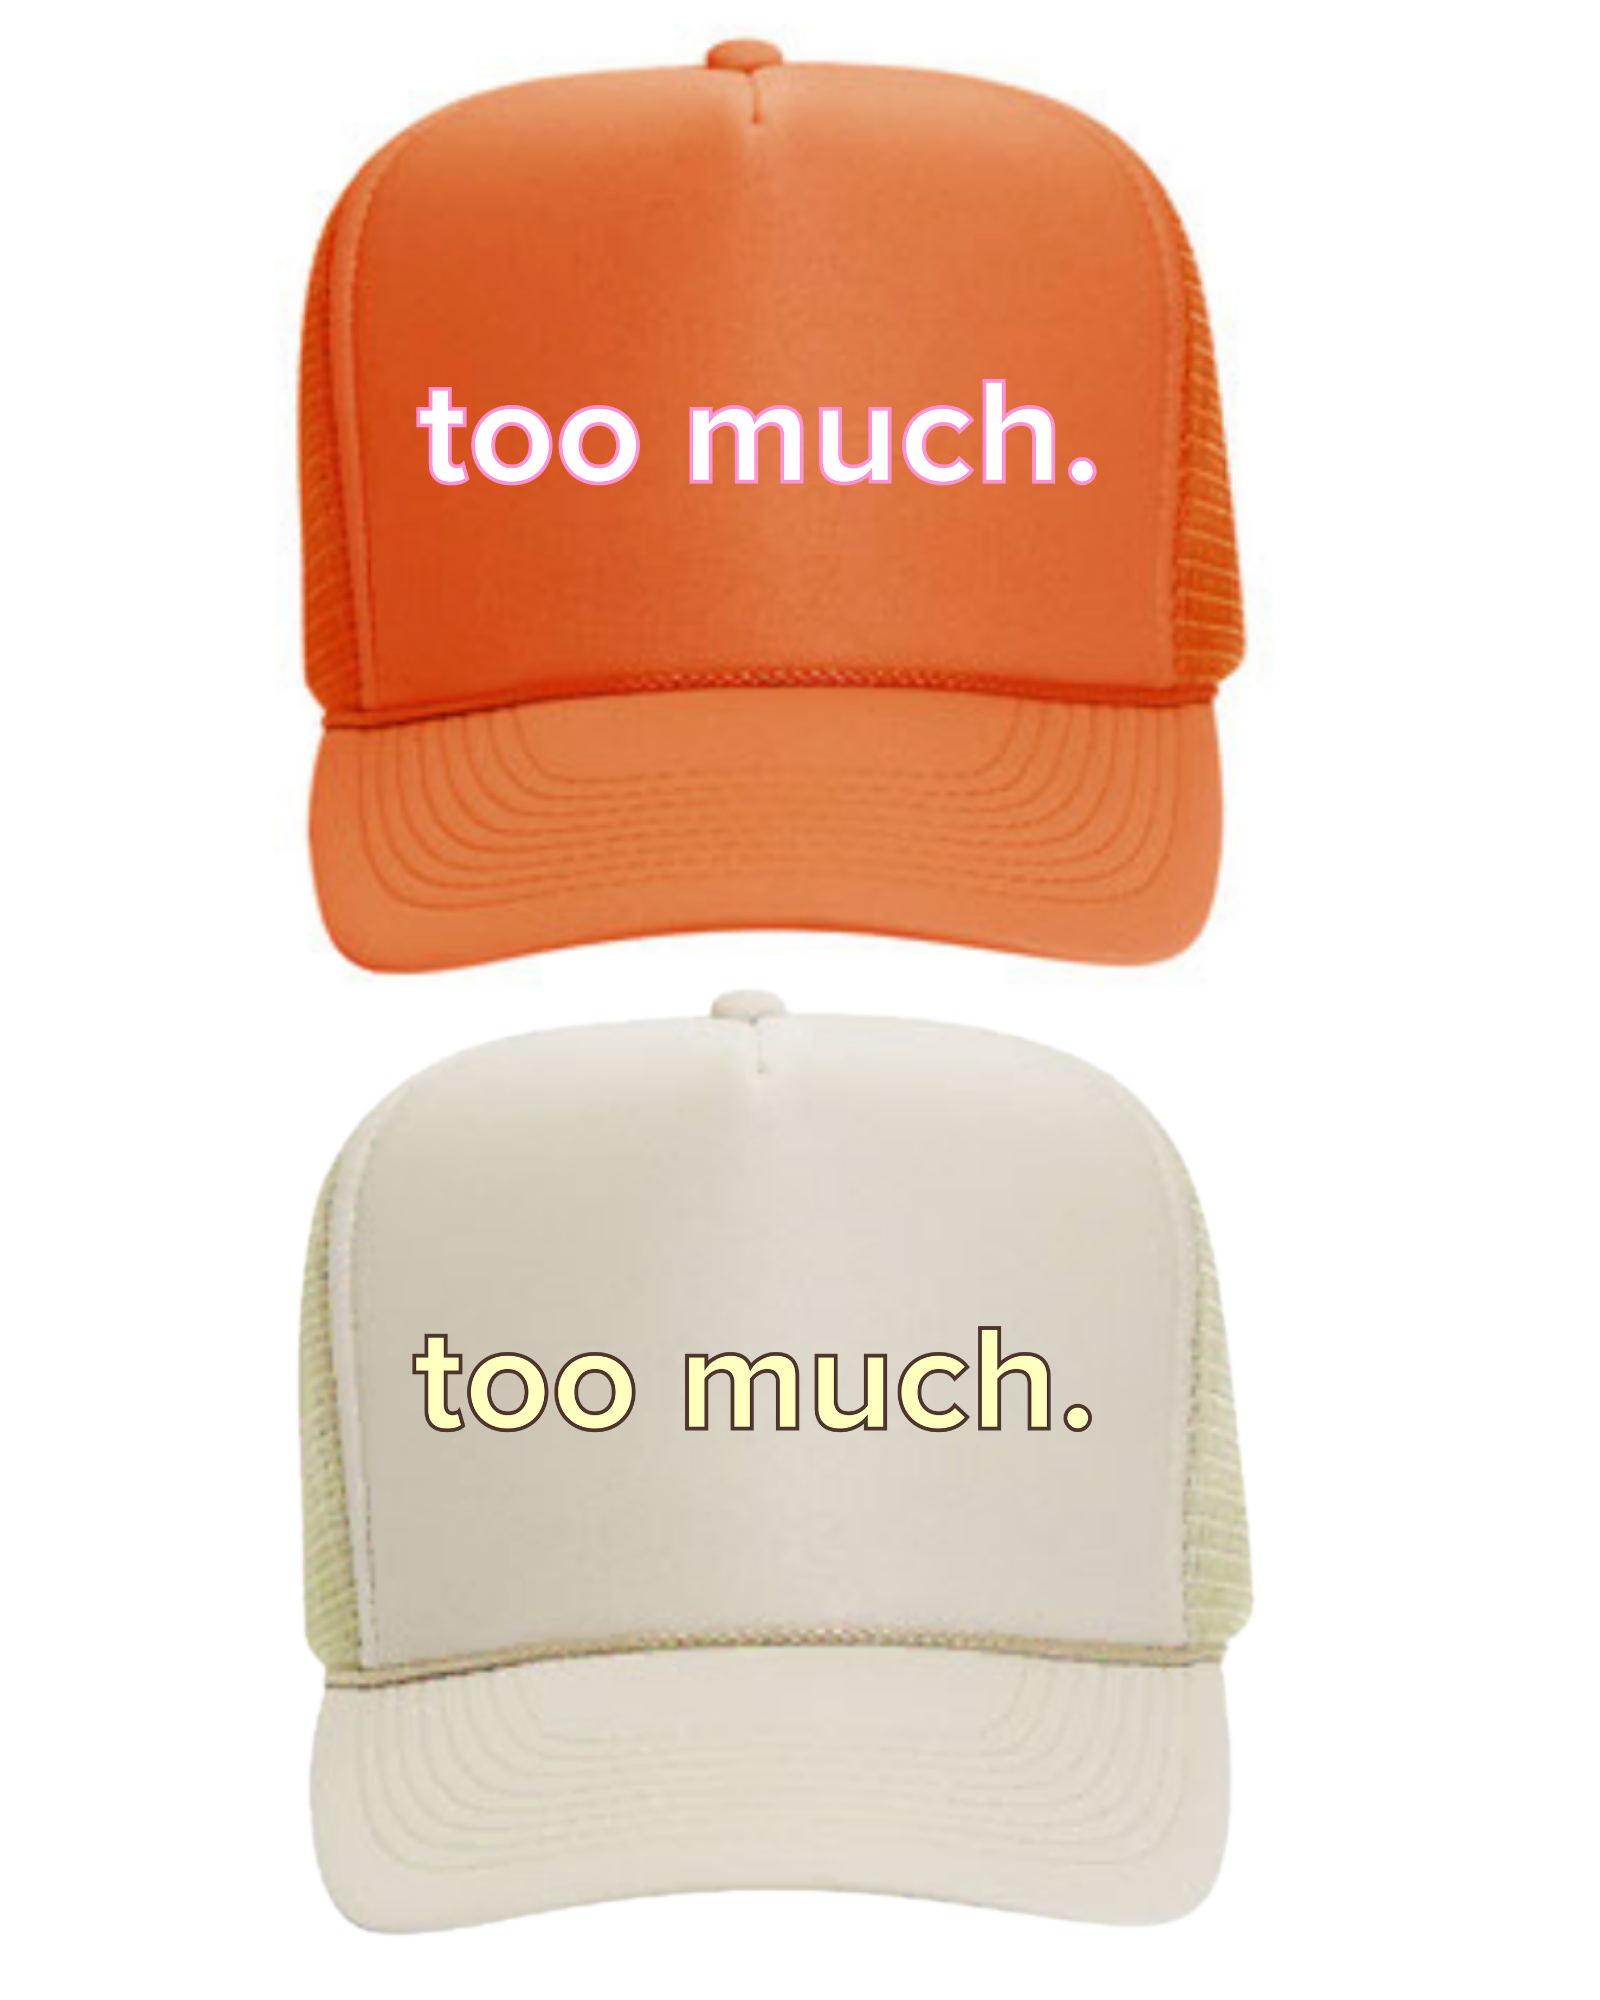 "Too Much" Hats